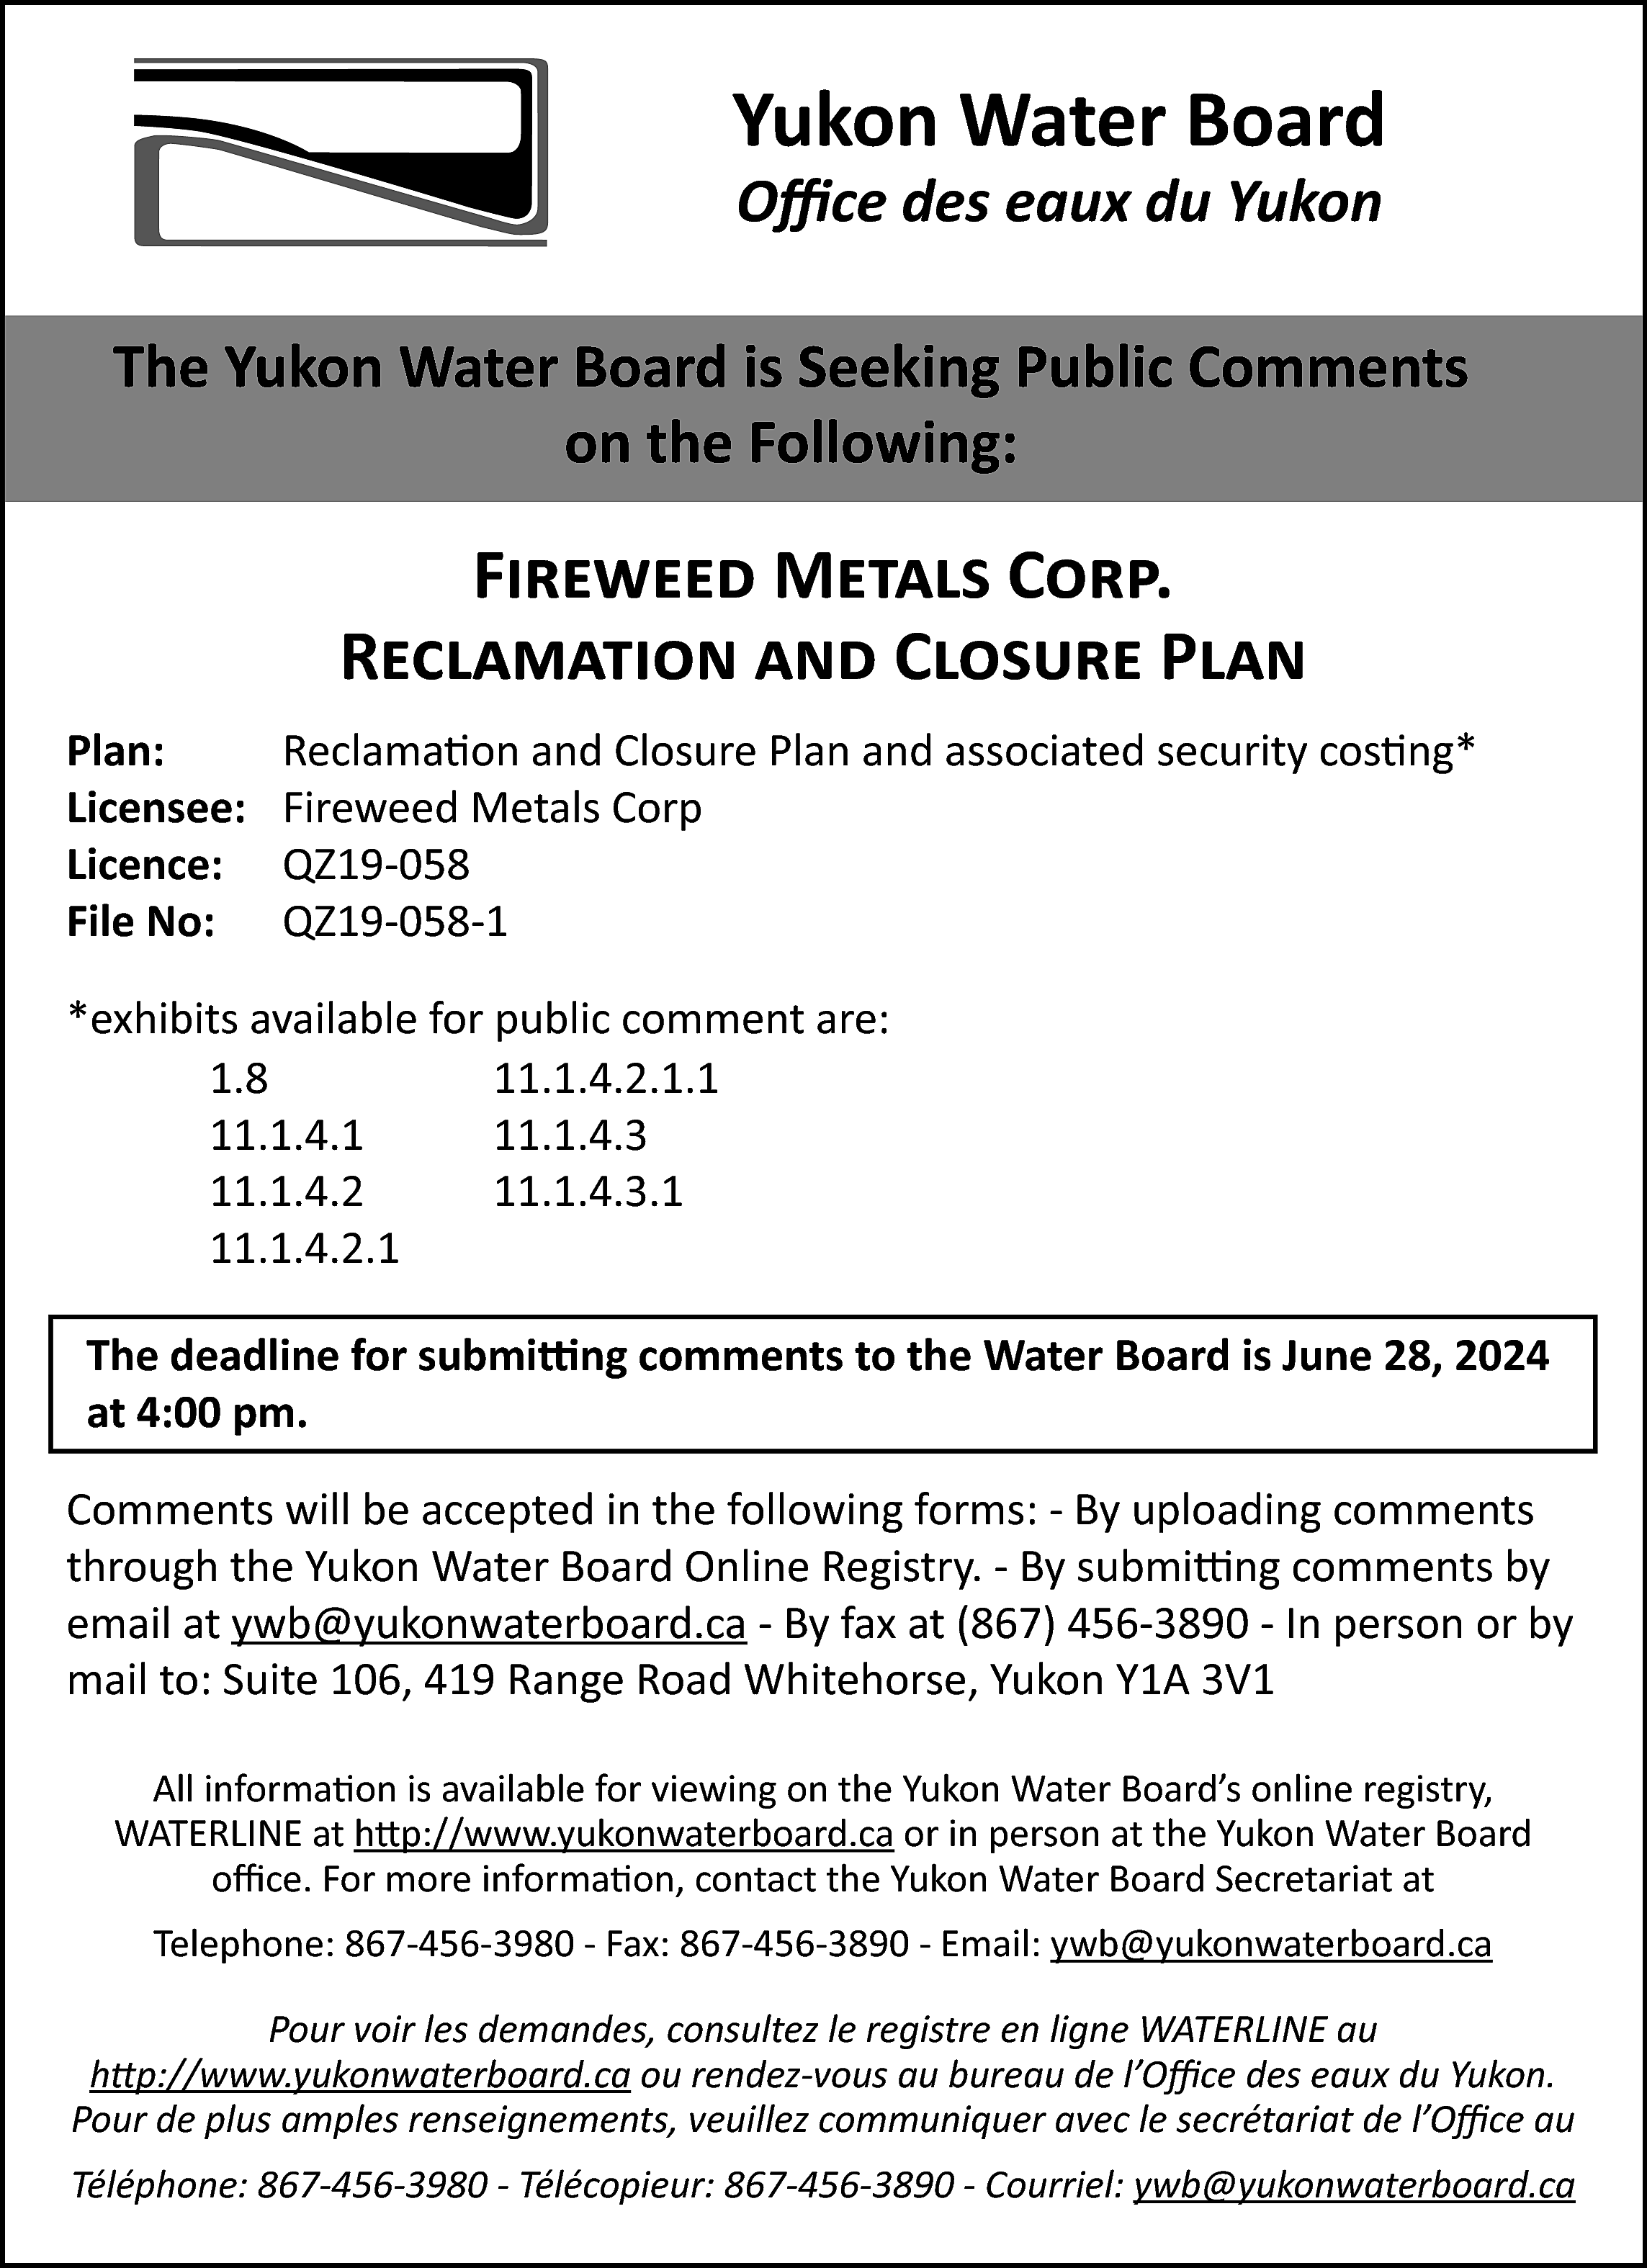 Yukon Water Board <br>Office des  Yukon Water Board  Office des eaux du Yukon    The Yukon Water Board is Seeking Public Comments  on the Following:    Fireweed Metals Corp.  Reclamation and Closure Plan  Plan:  Licensee:  Licence:  File No:    Reclamation and Closure Plan and associated security costing*  Fireweed Metals Corp  QZ19-058  QZ19-058-1    *exhibits available for public comment are:  1.8  11.1.4.2.1.1  11.1.4.1  11.1.4.3  11.1.4.2  11.1.4.3.1  11.1.4.2.1  The deadline for submitting comments to the Water Board is June 28, 2024  at 4:00 pm.  Comments will be accepted in the following forms: - By uploading comments  through the Yukon Water Board Online Registry. - By submitting comments by  email at ywb@yukonwaterboard.ca - By fax at (867) 456-3890 - In person or by  mail to: Suite 106, 419 Range Road Whitehorse, Yukon Y1A 3V1  All information is available for viewing on the Yukon Water Board’s online registry,  WATERLINE at http://www.yukonwaterboard.ca or in person at the Yukon Water Board  office. For more information, contact the Yukon Water Board Secretariat at  Telephone: 867-456-3980 - Fax: 867-456-3890 - Email: ywb@yukonwaterboard.ca  Pour voir les demandes, consultez le registre en ligne WATERLINE au  http://www.yukonwaterboard.ca ou rendez-vous au bureau de l’Office des eaux du Yukon.  Pour de plus amples renseignements, veuillez communiquer avec le secrétariat de l’Office au  Téléphone: 867-456-3980 - Télécopieur: 867-456-3890 - Courriel: ywb@yukonwaterboard.ca    